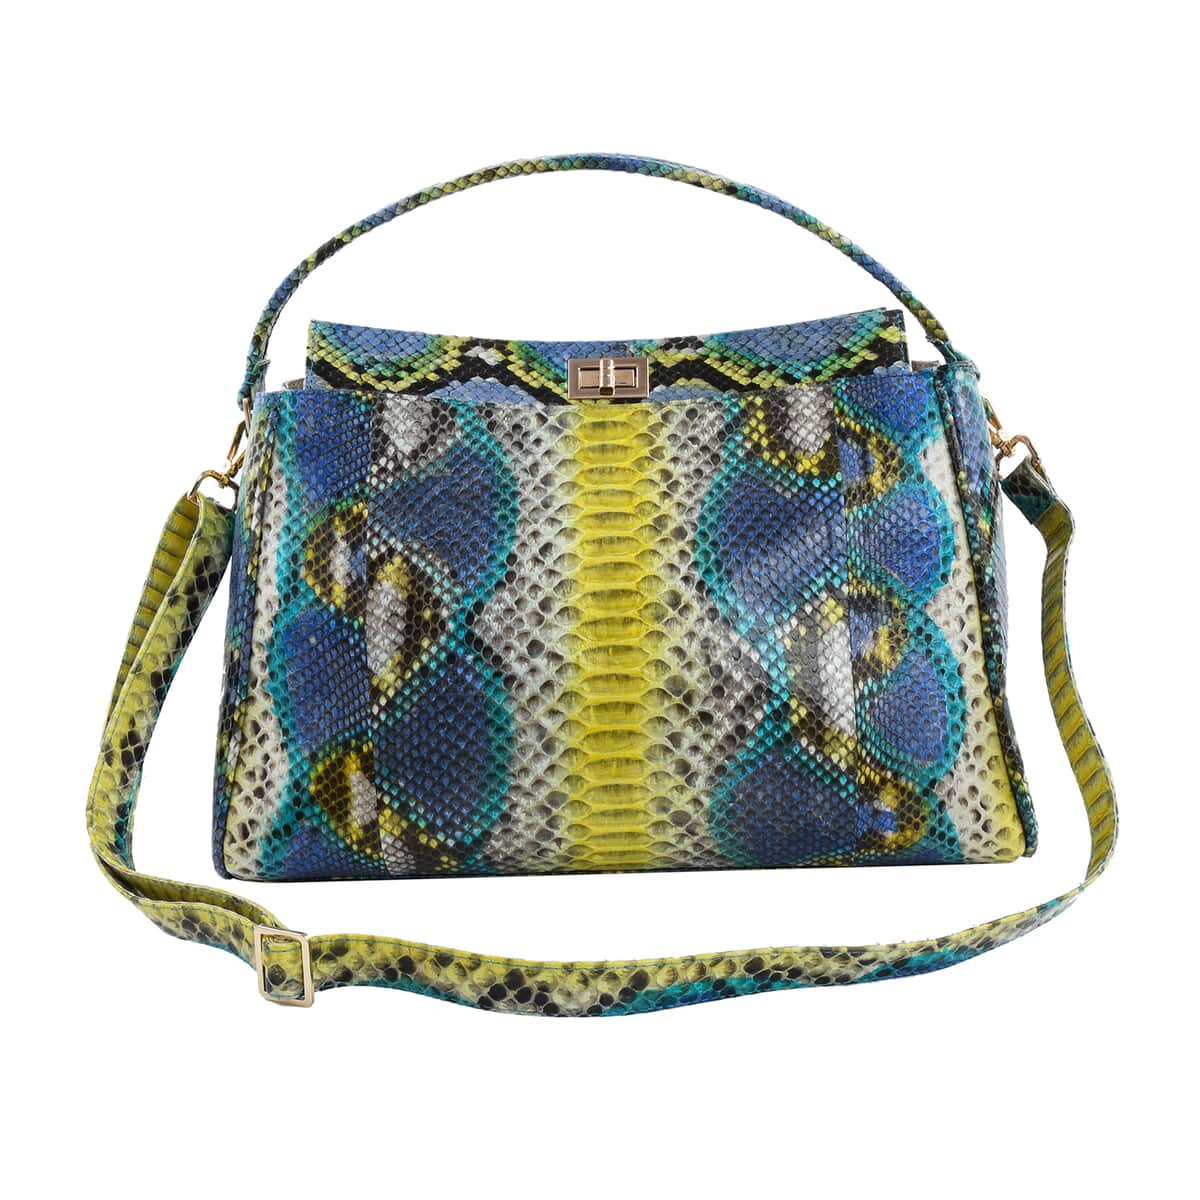 The Pelle Python Collection Handmade 100% Genuine Python Leather Blue & Yellow Tote Bag (14.75"x9.2"x6") with Detachable and Adjustable Strap image number 0